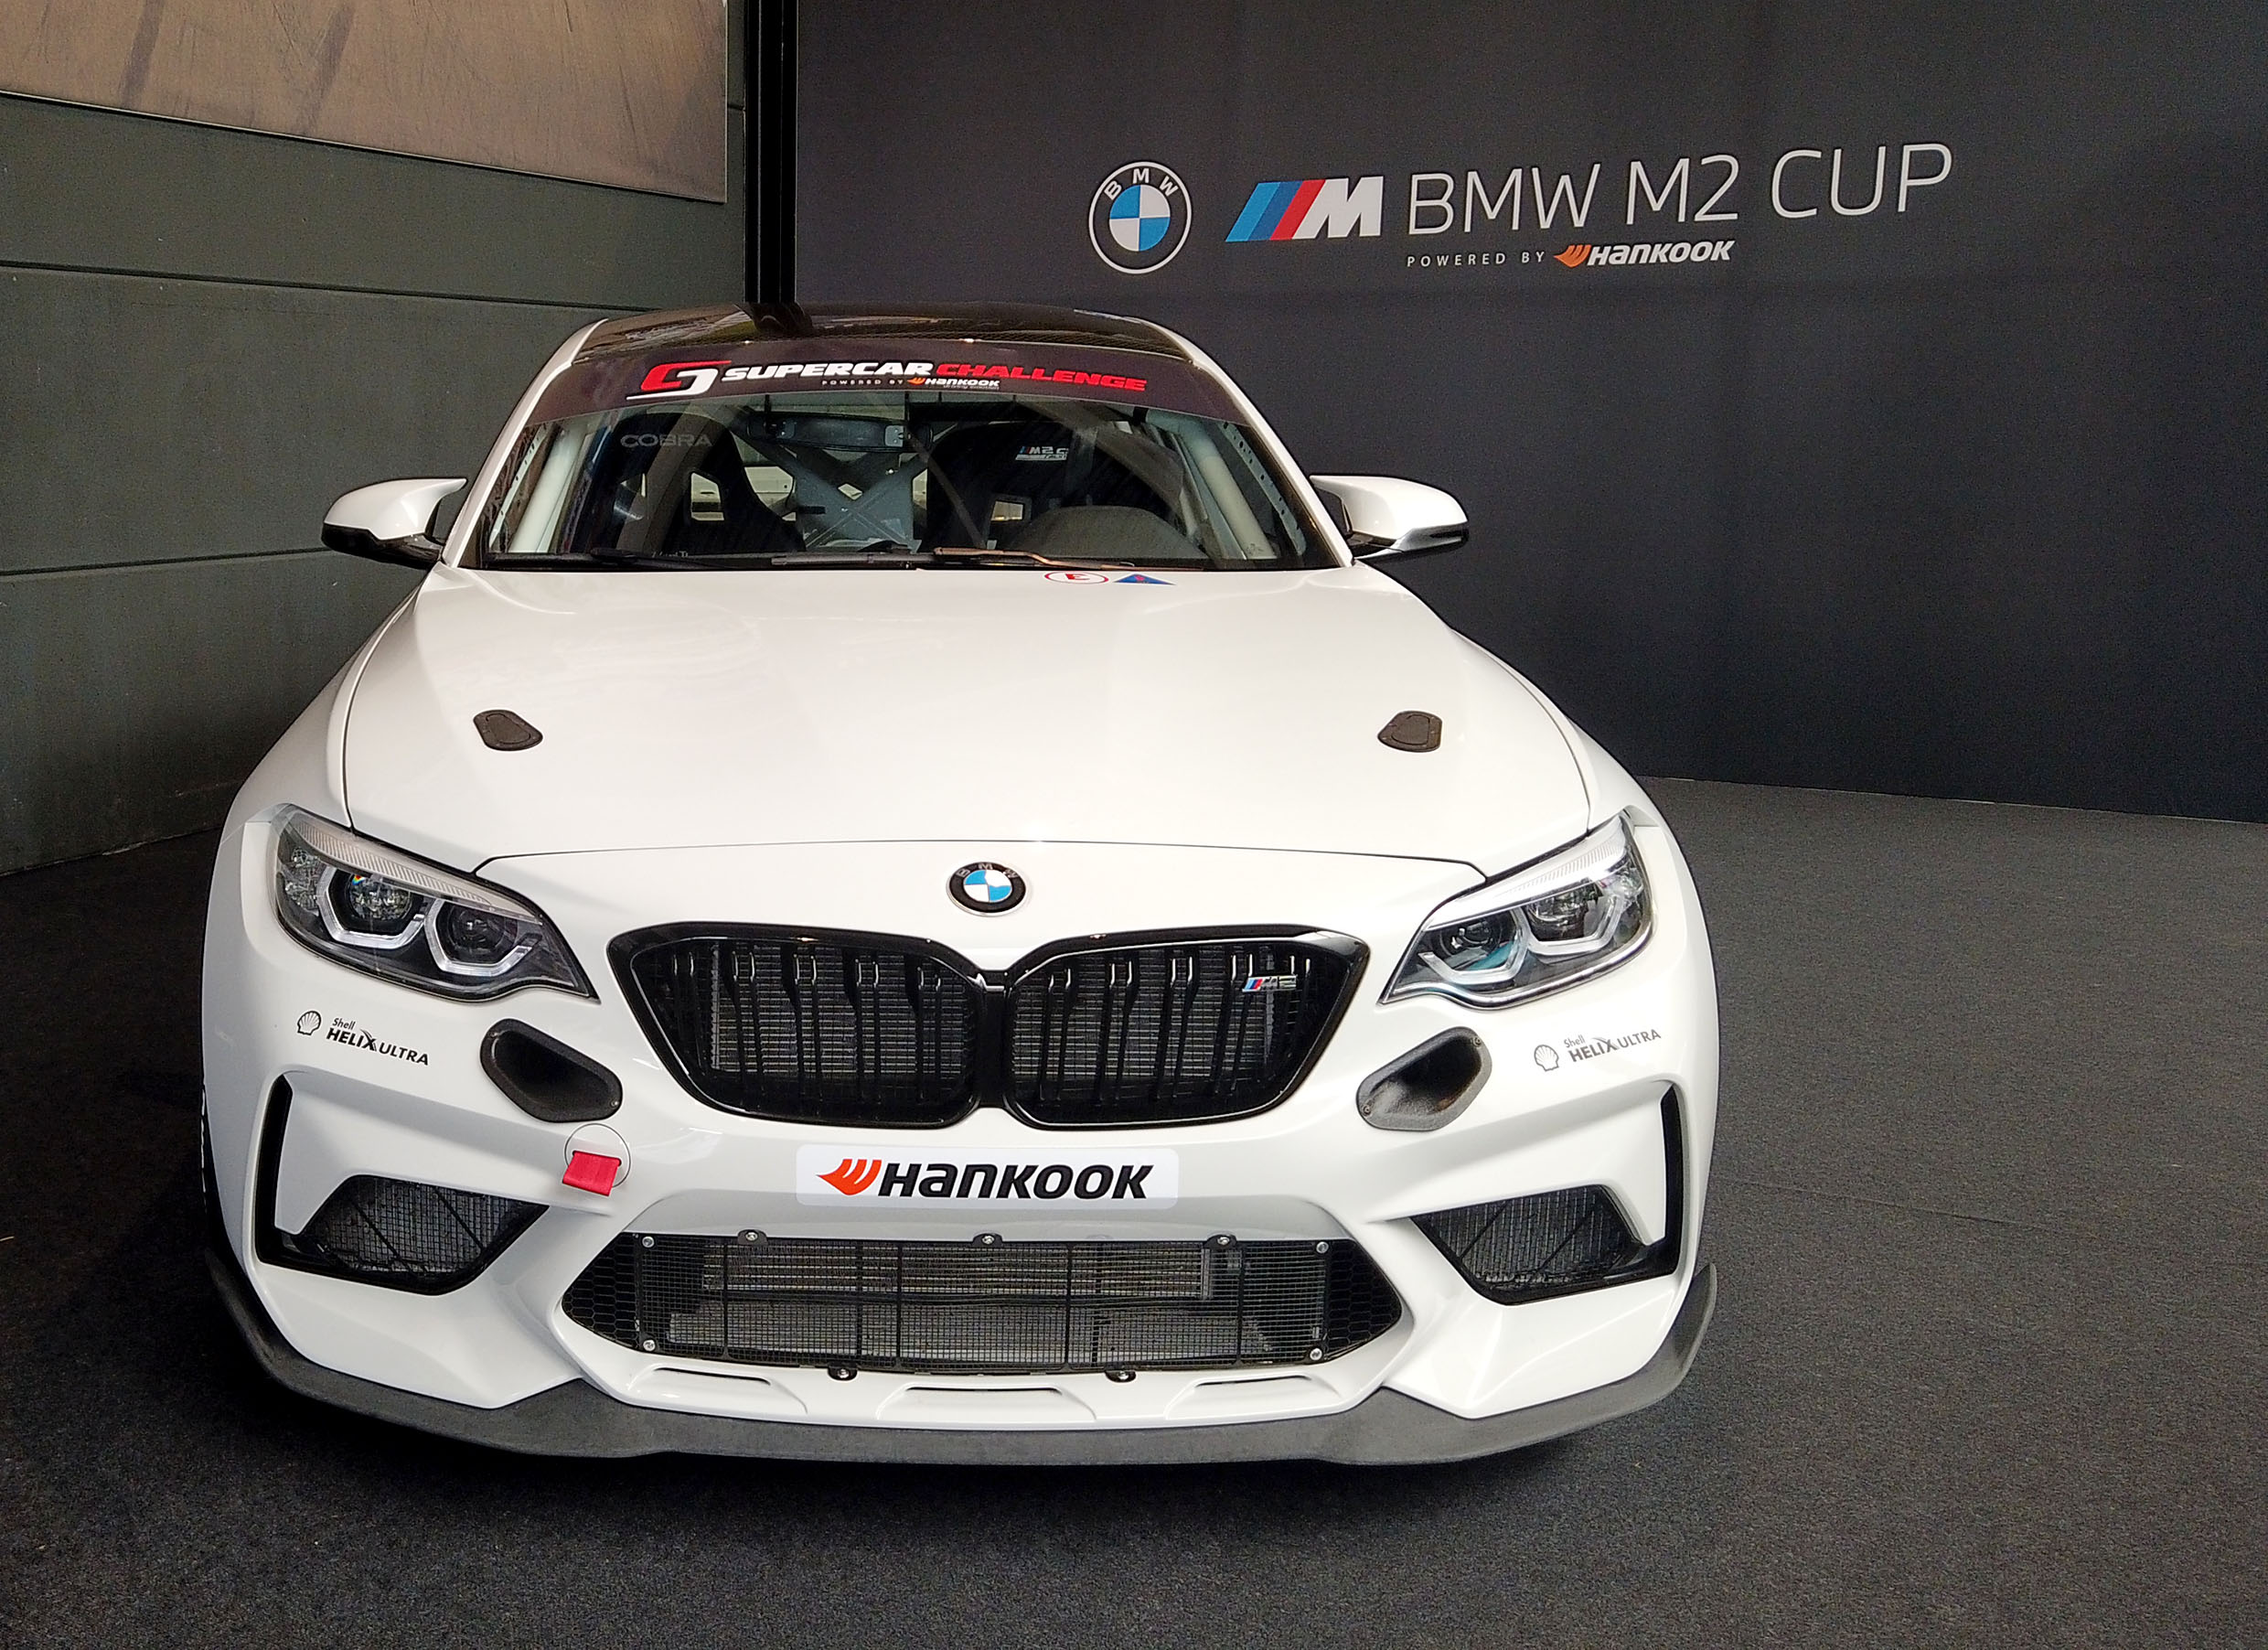 The BMW M2CS Cup